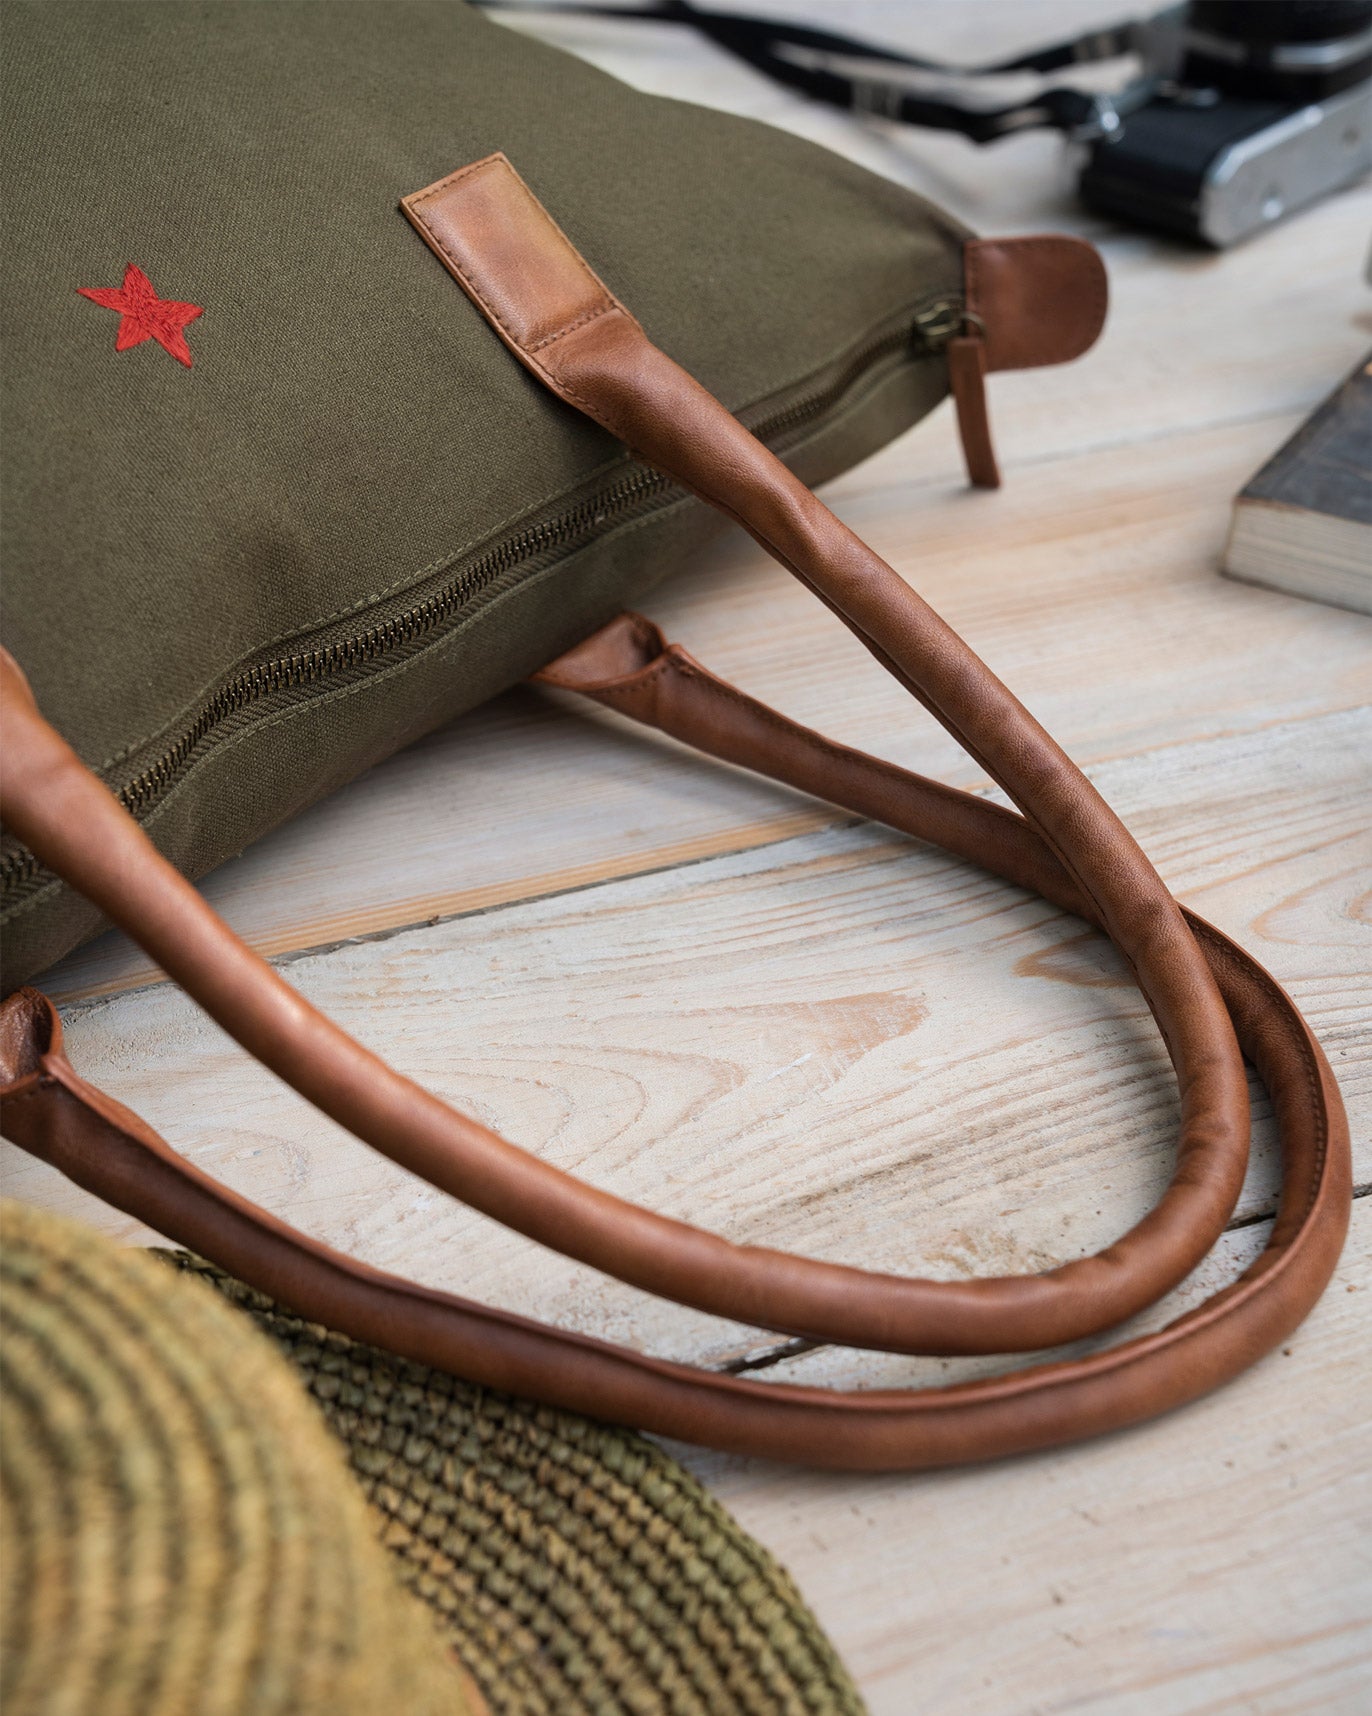 Traveller Tote - Olive Night